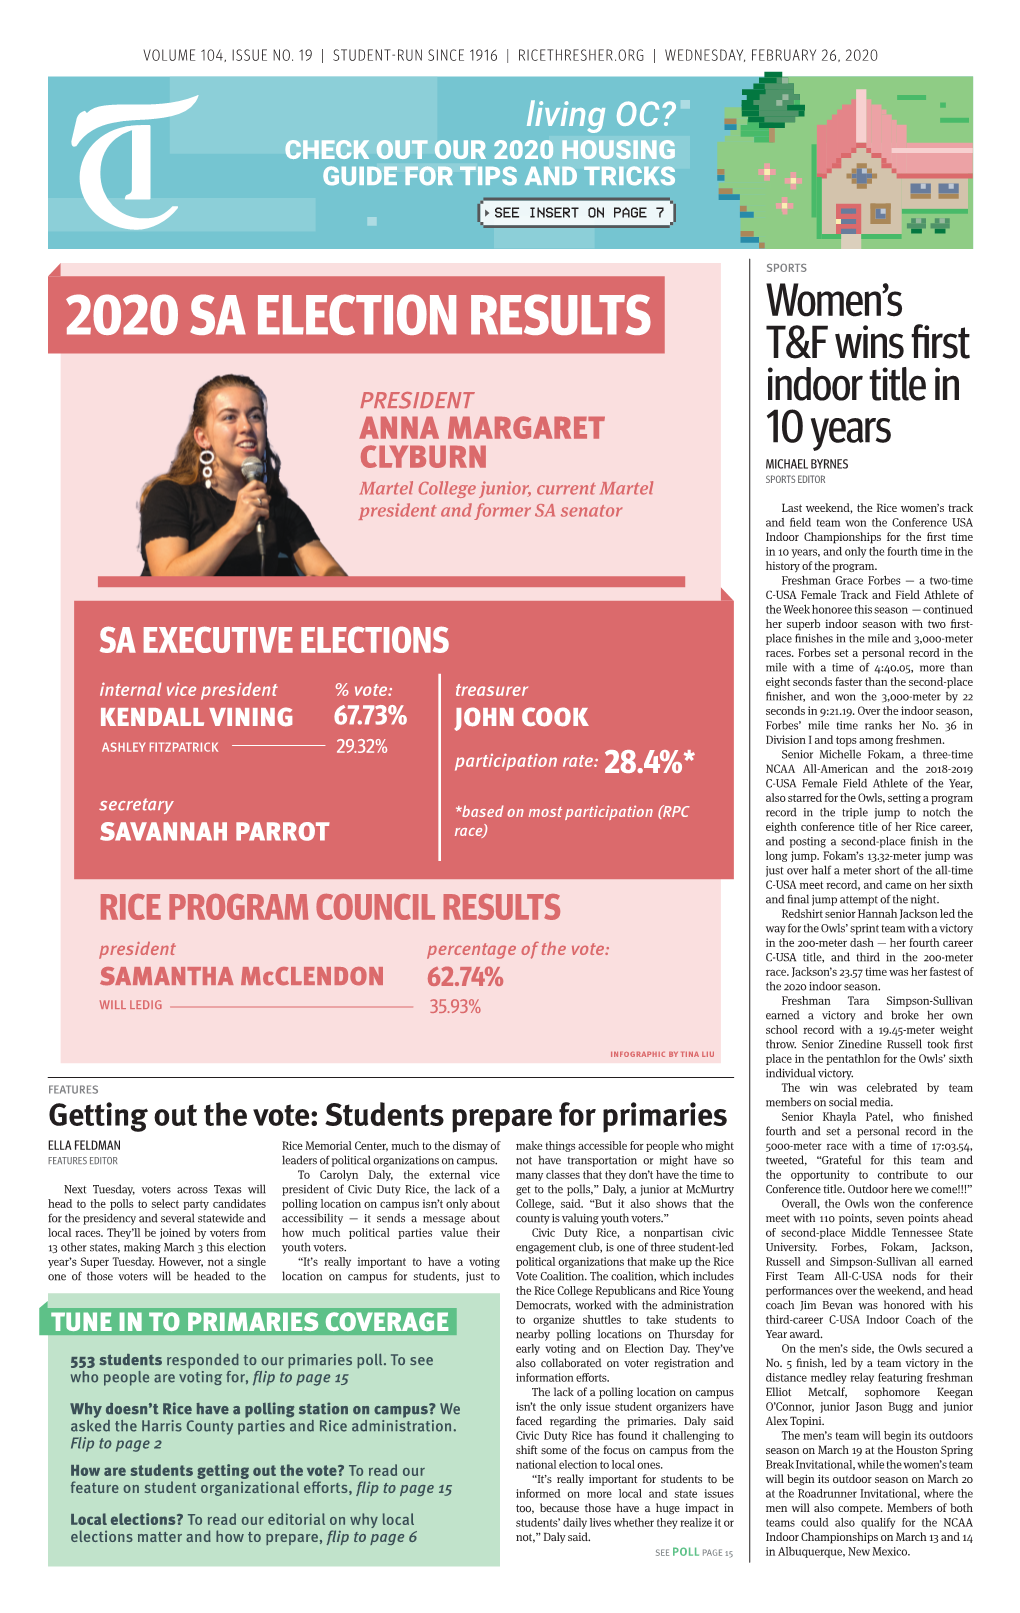 2020 SA ELECTION RESULTS T&F Wins First